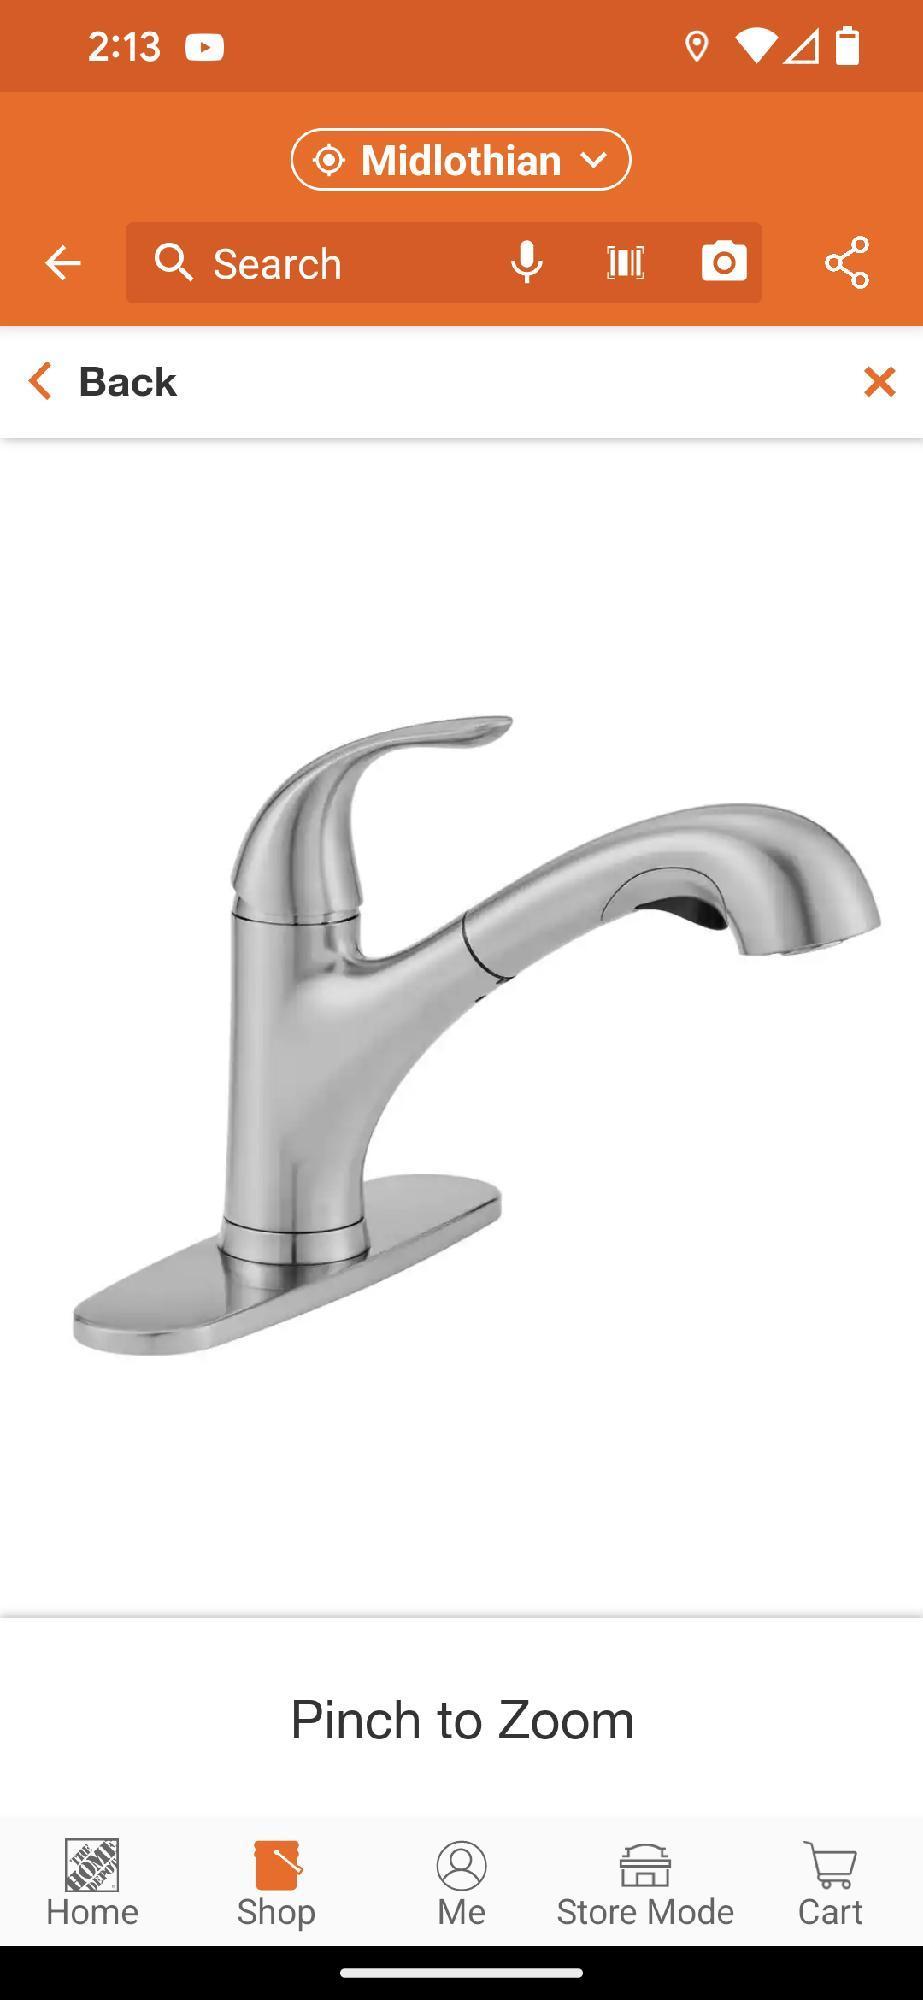 Glacier Bay Market Single-Handle Pull-Out Sprayer Kitchen Faucet in Stainless Steel, Appears to be